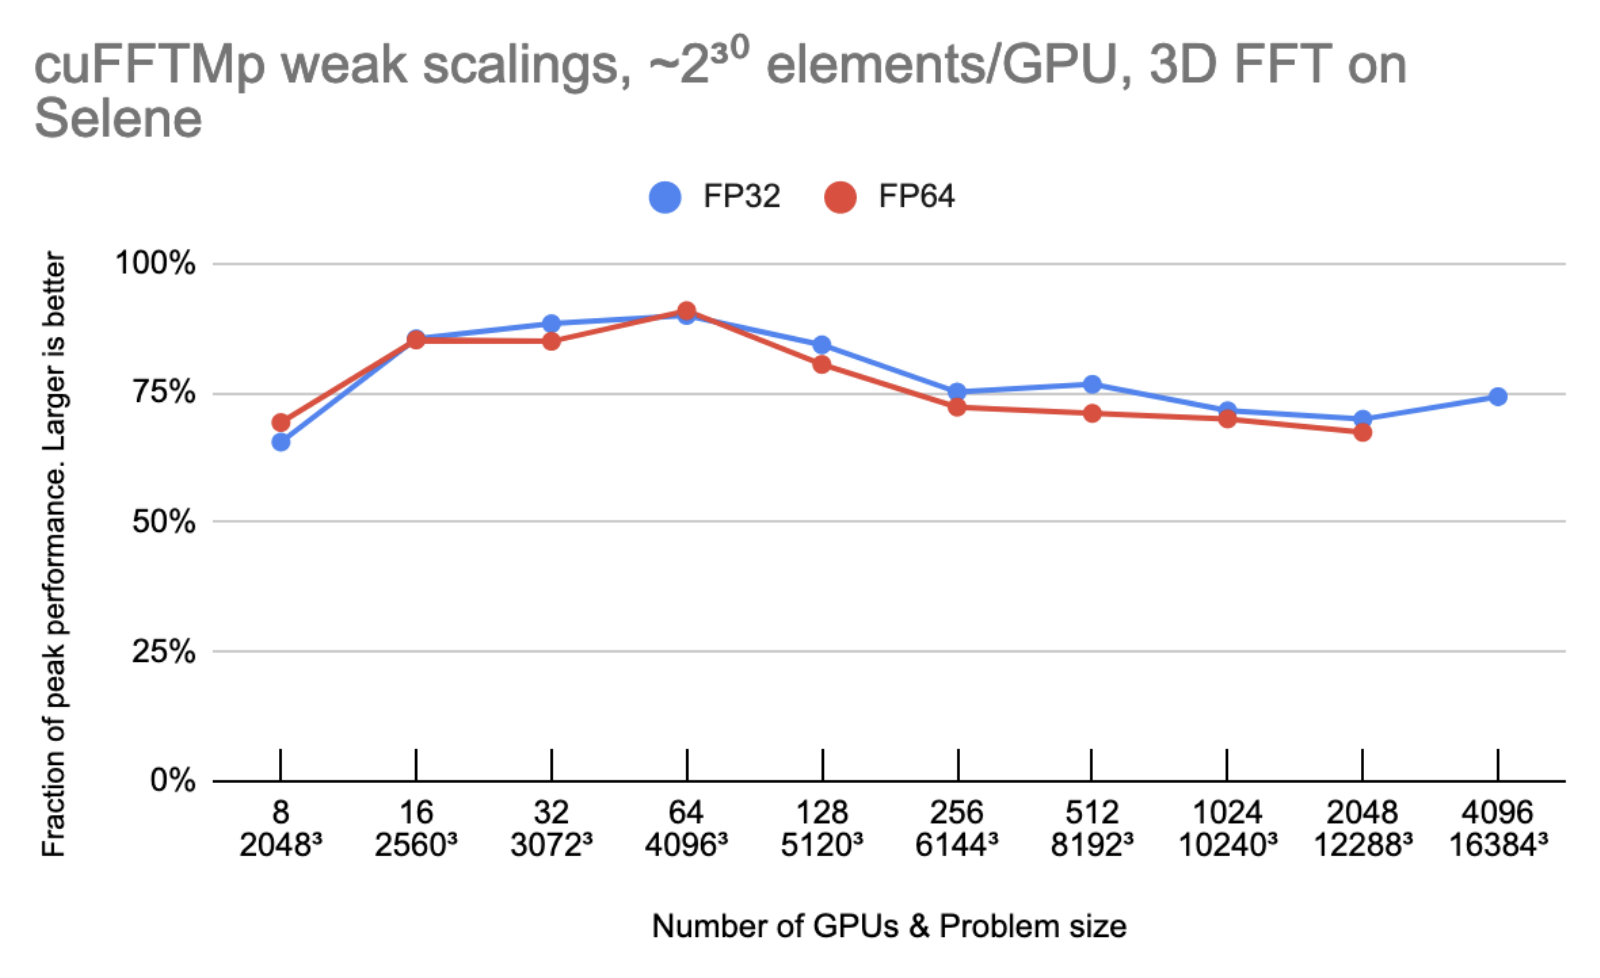 Chart shows cuFFTMp peak performance relative to hardware (that is, the number of GPUs and interconnects).